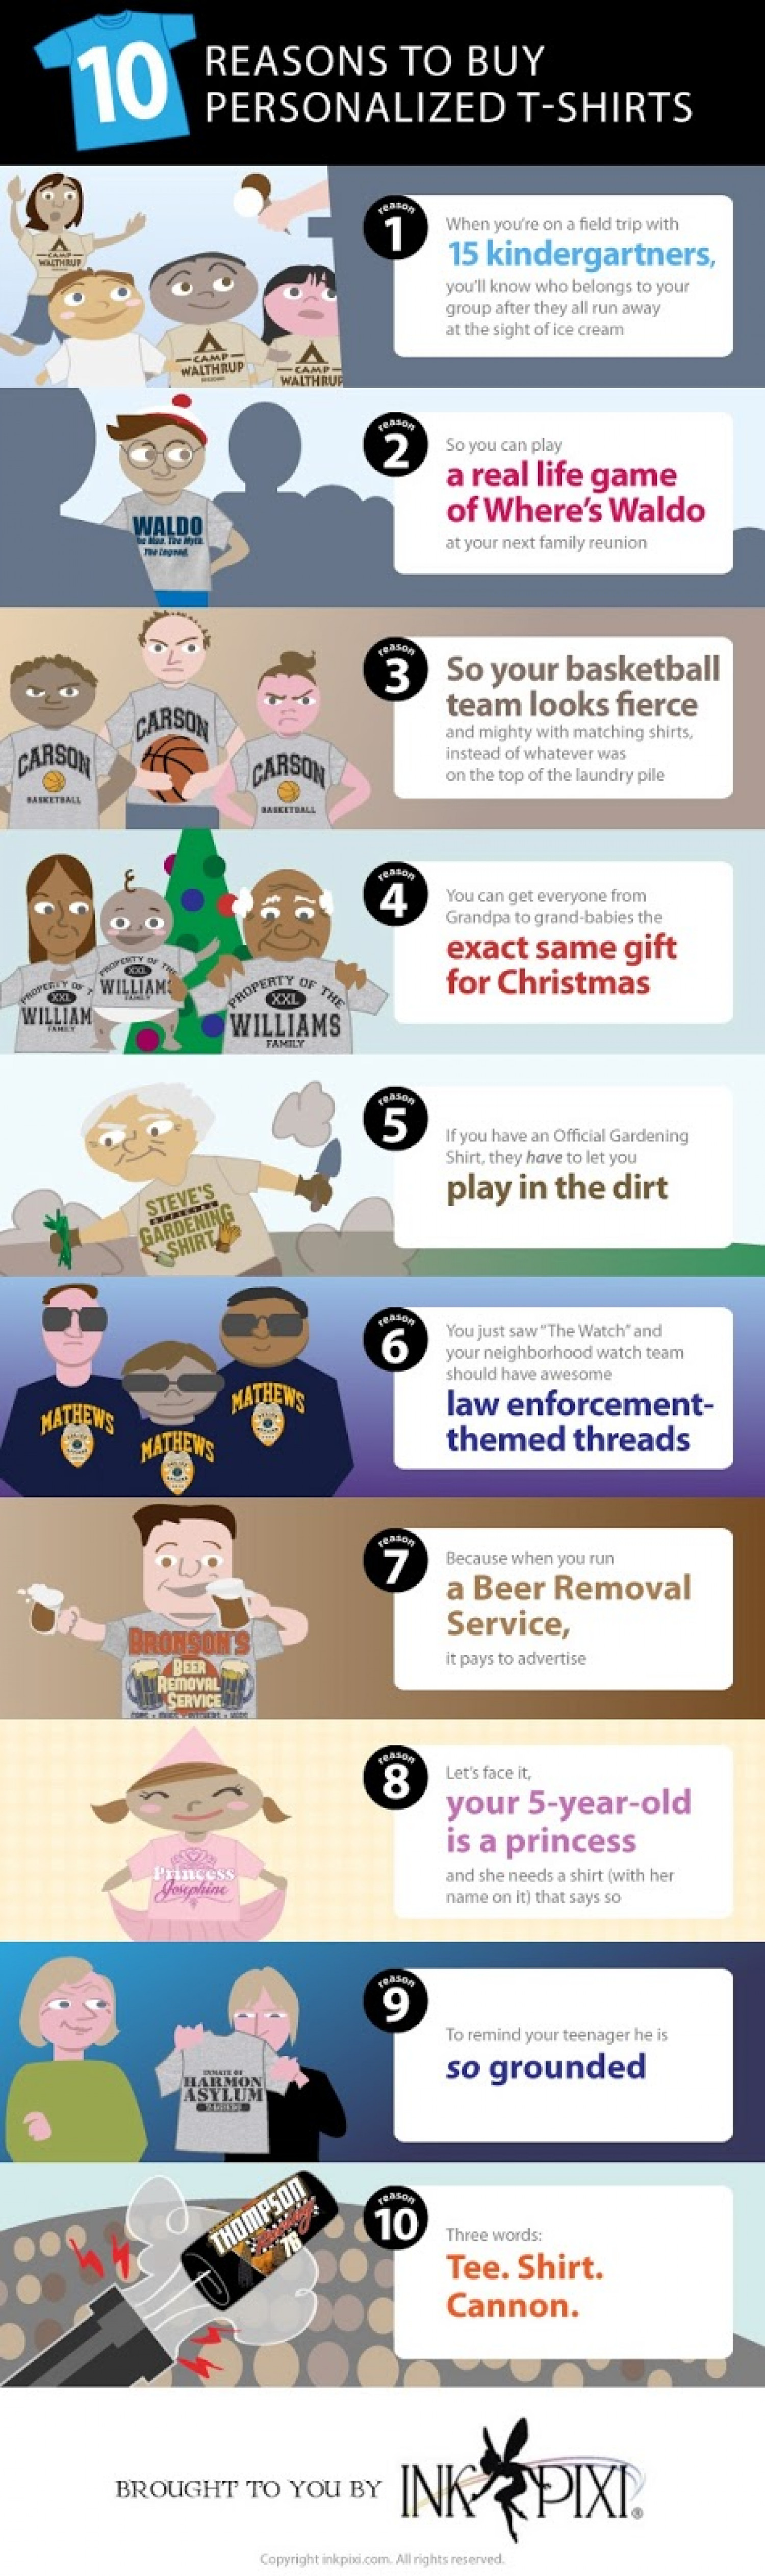 10 Reasons to Buy Personalized T-Shirts Infographic